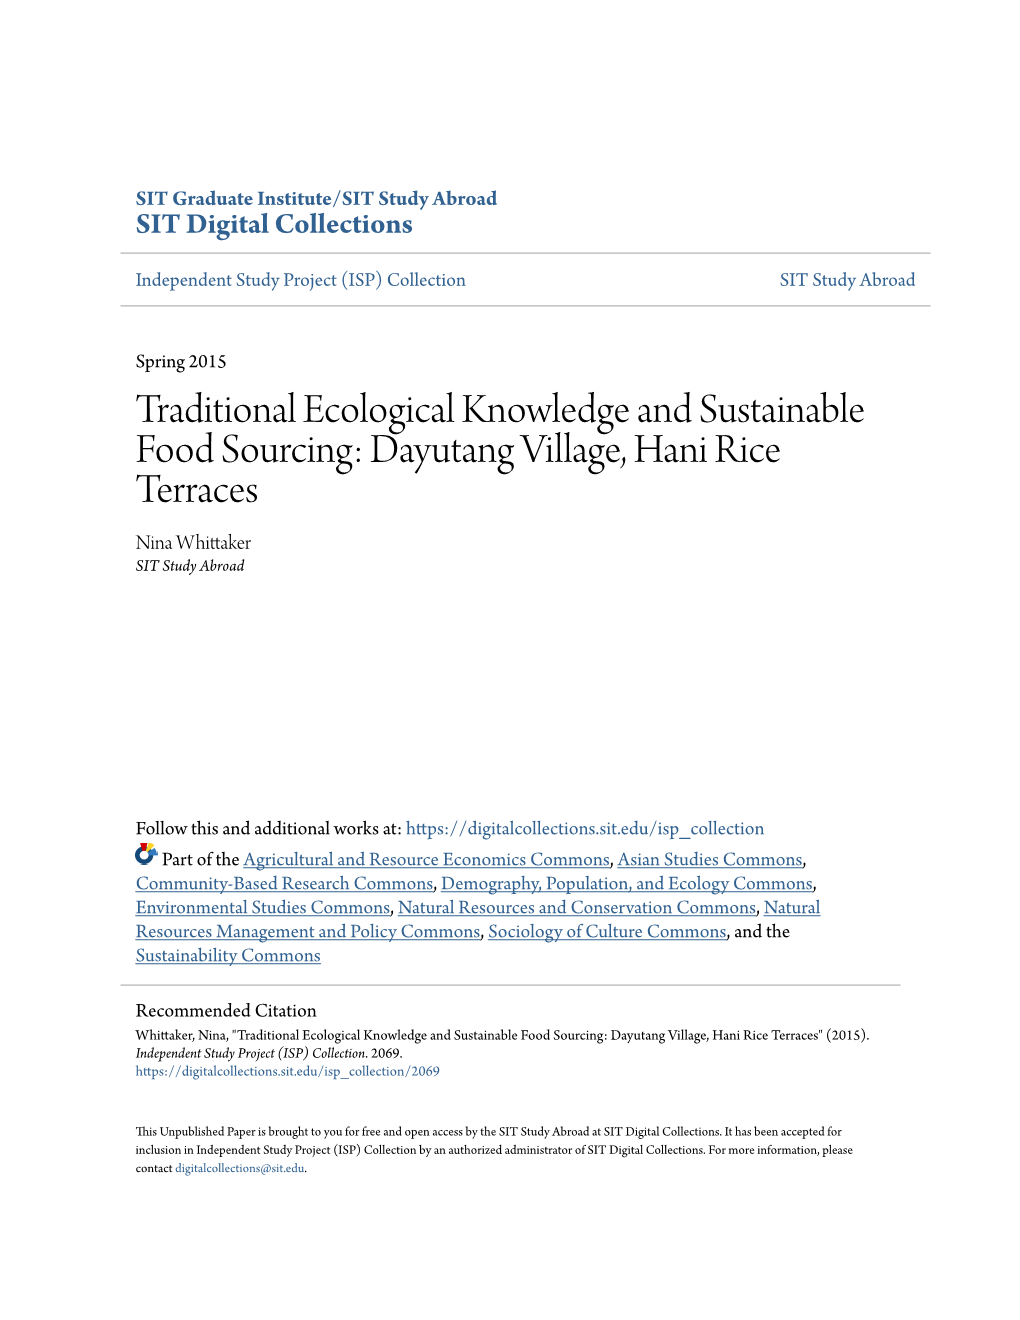 Traditional Ecological Knowledge and Sustainable Food Sourcing: Dayutang Village, Hani Rice Terraces Nina Whittaker SIT Study Abroad